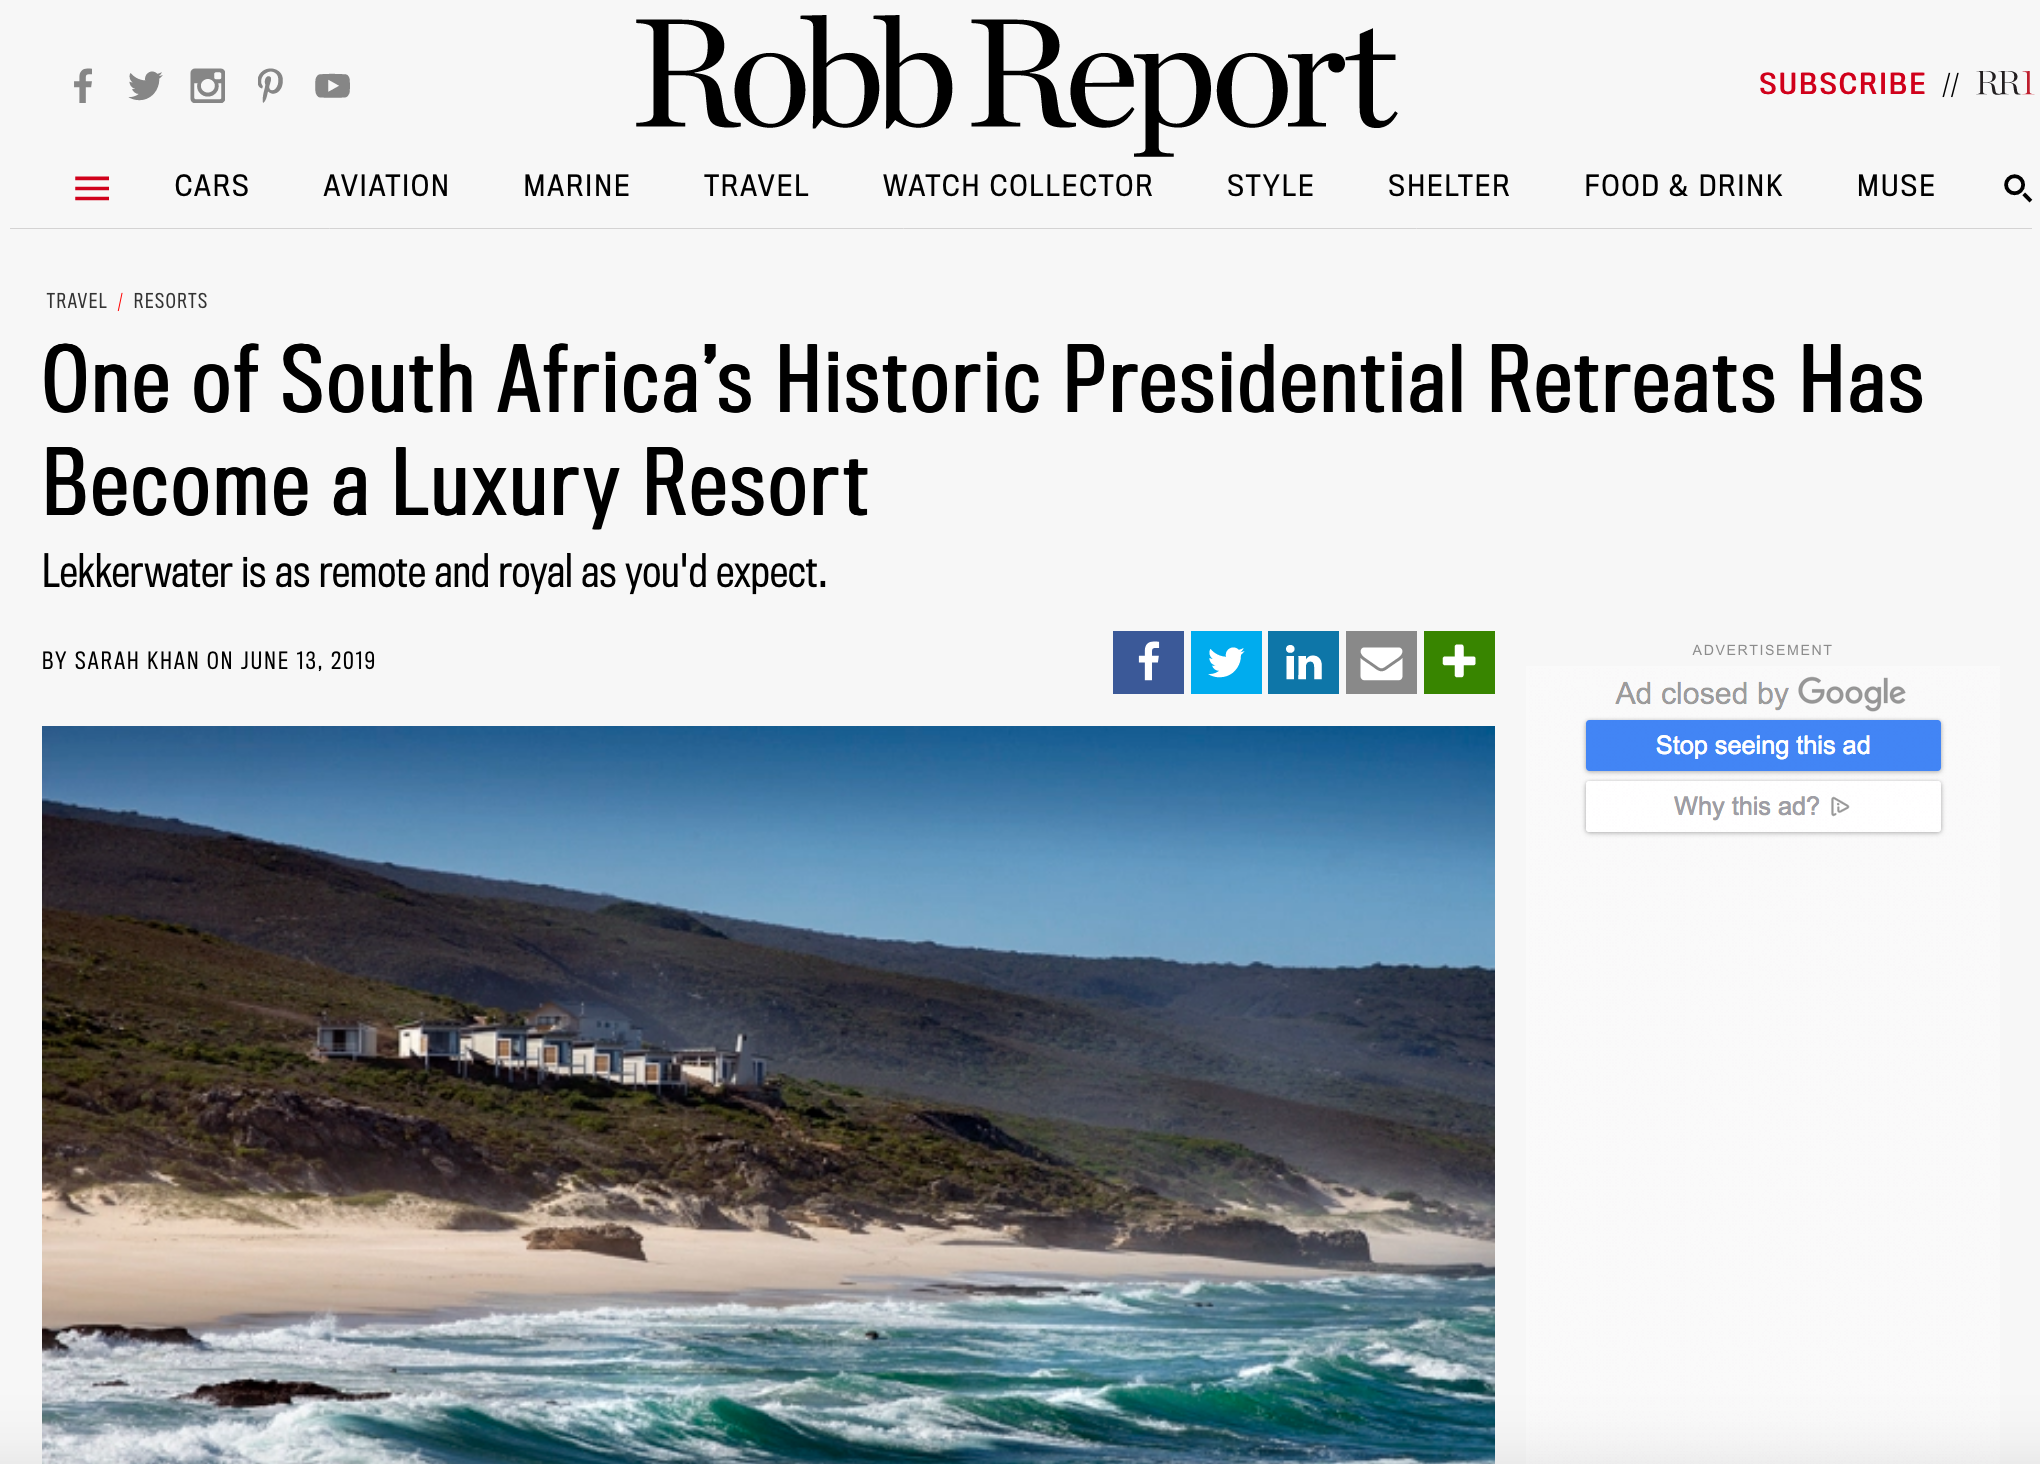 Robb Report: One of South Africaâ€™s Historic Presidential Retreats Has Become a Luxury Resort